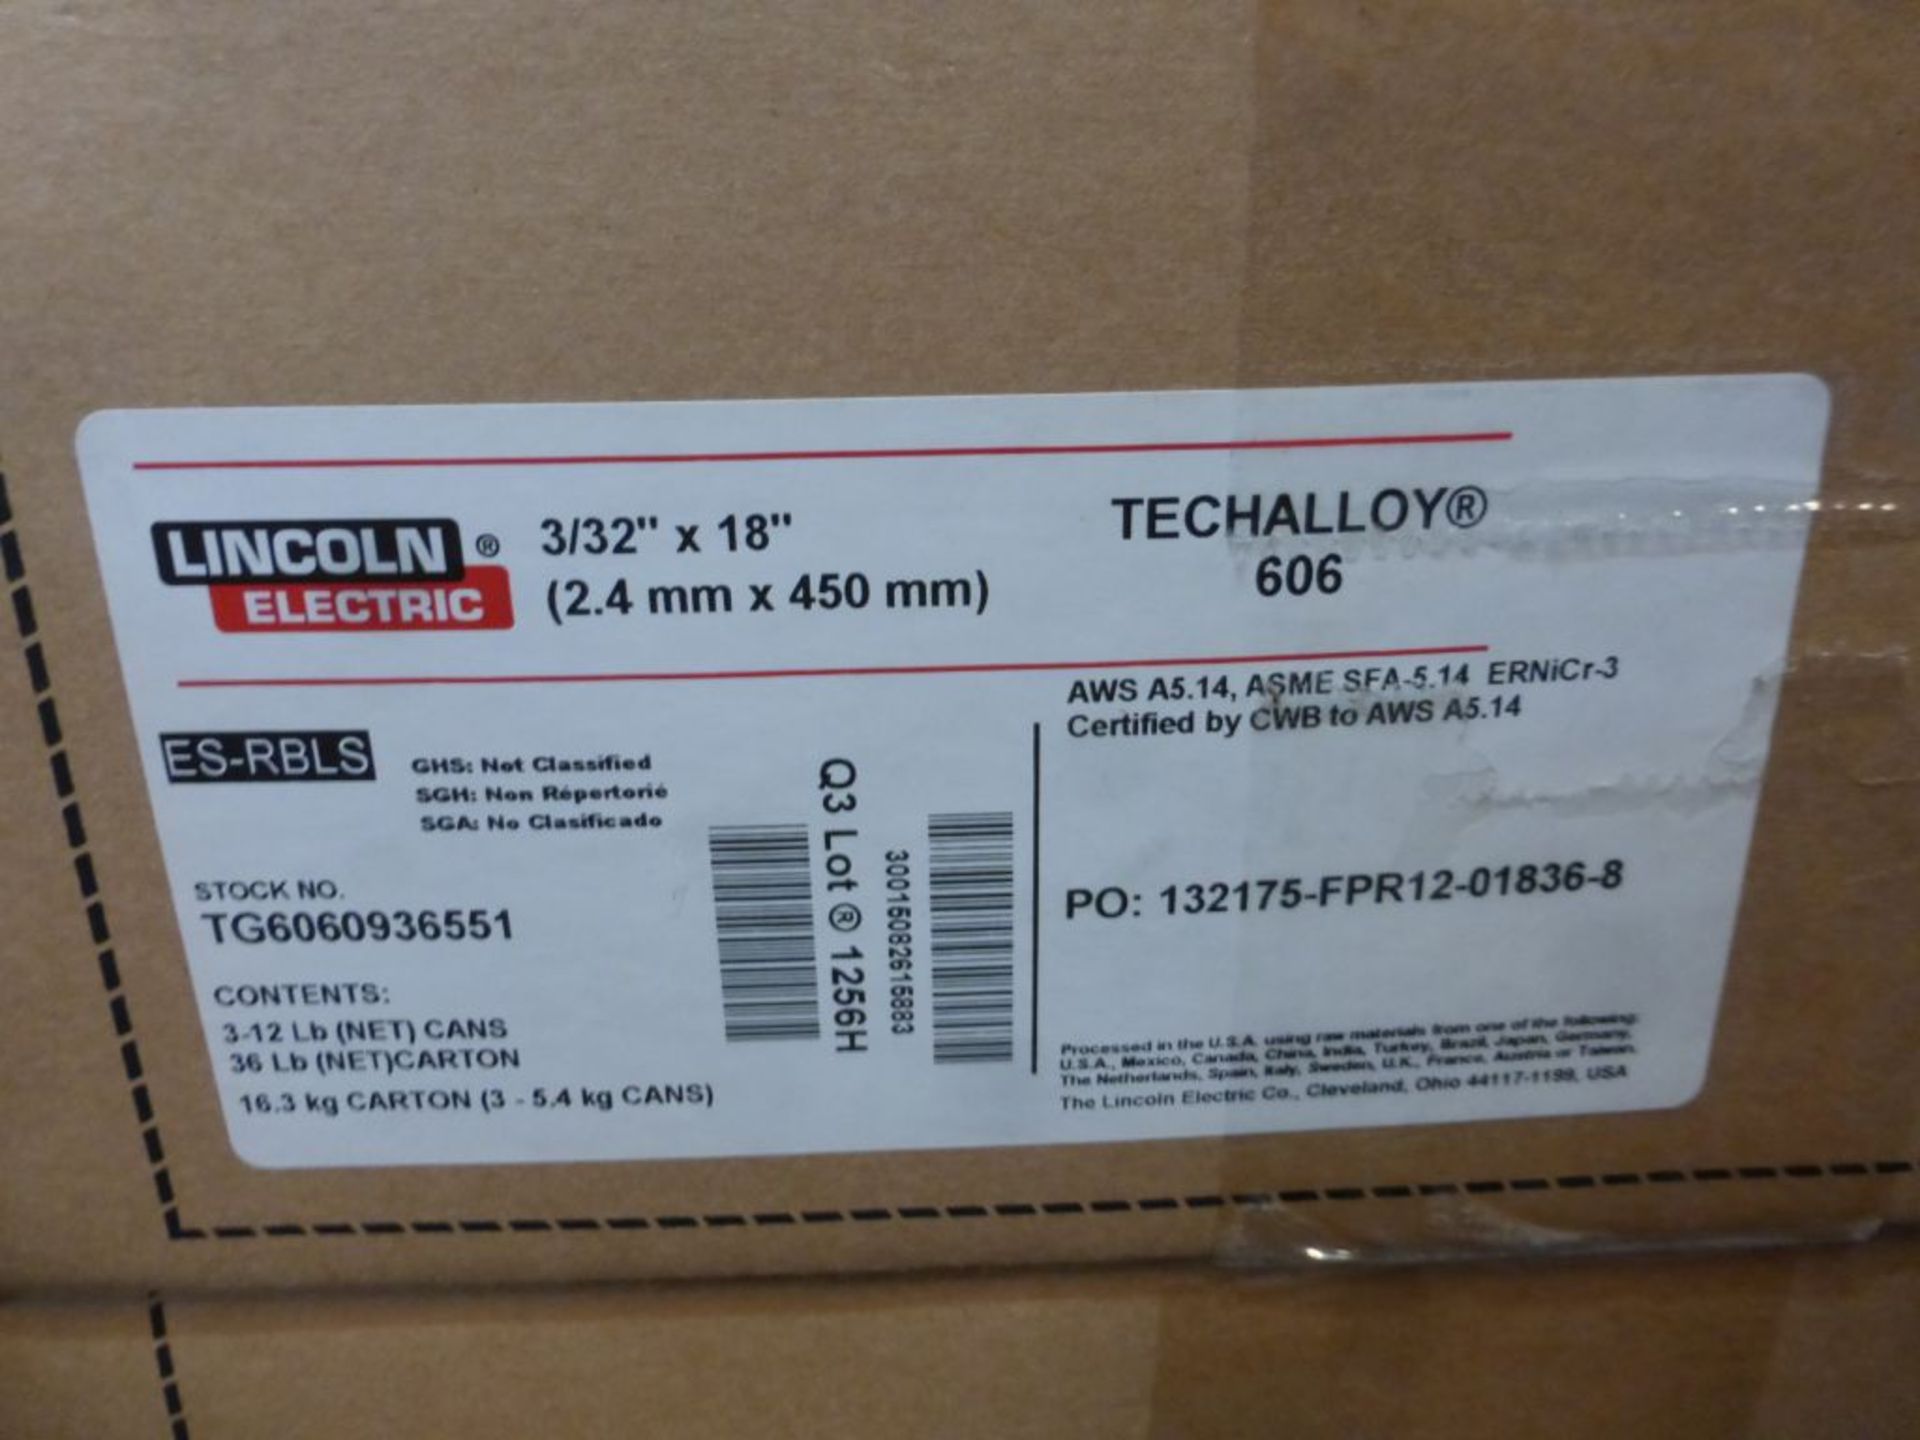 Lot of (8) Boxes of Lincoln Electric Techalloy 606 Welding Wire | Stock No. TG6060936551; 3/32" x - Image 9 of 12